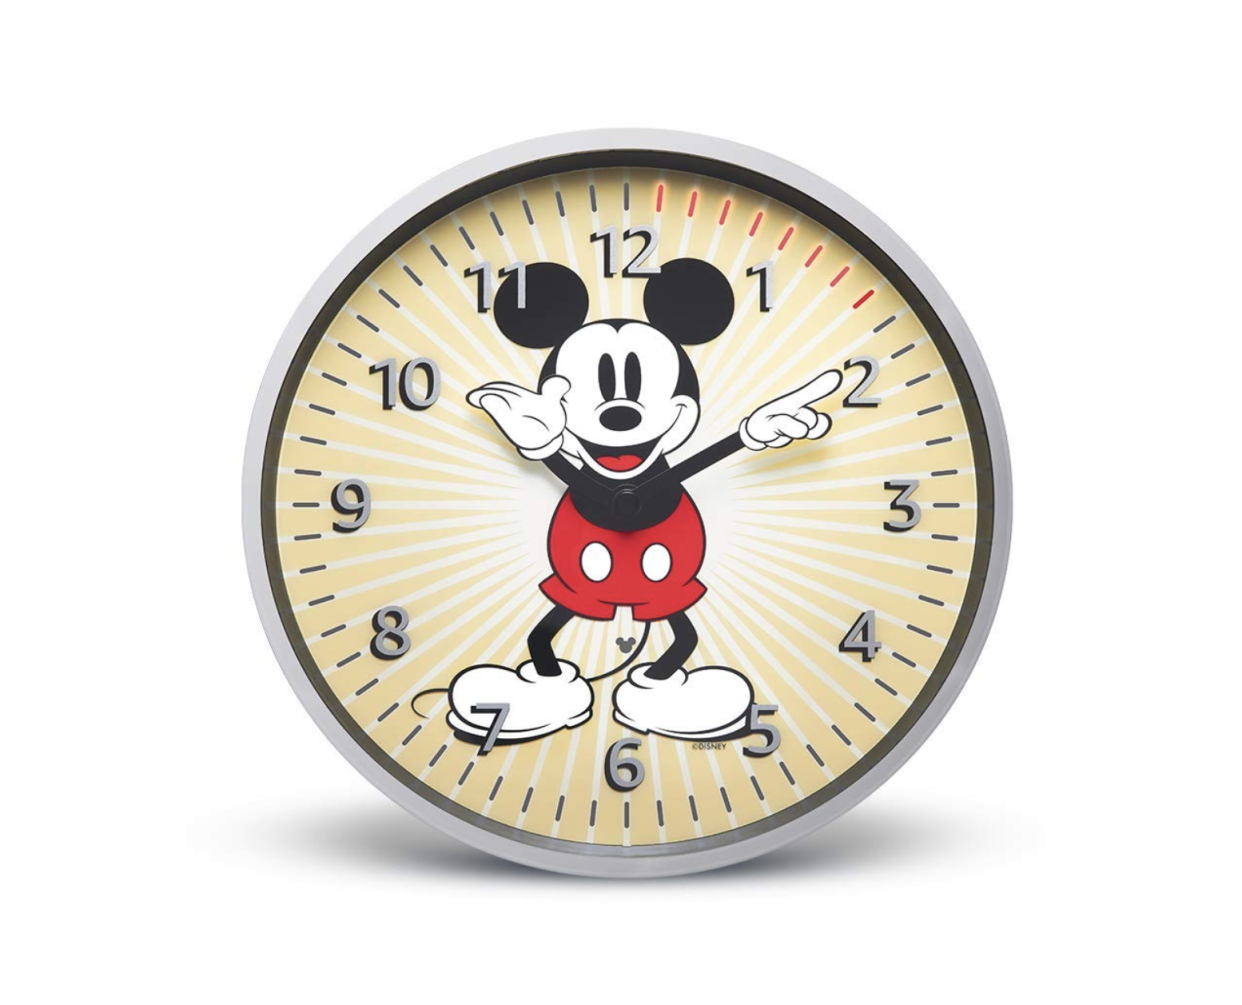 Disney's Mickey Mouse edition of the Echo Wall clock